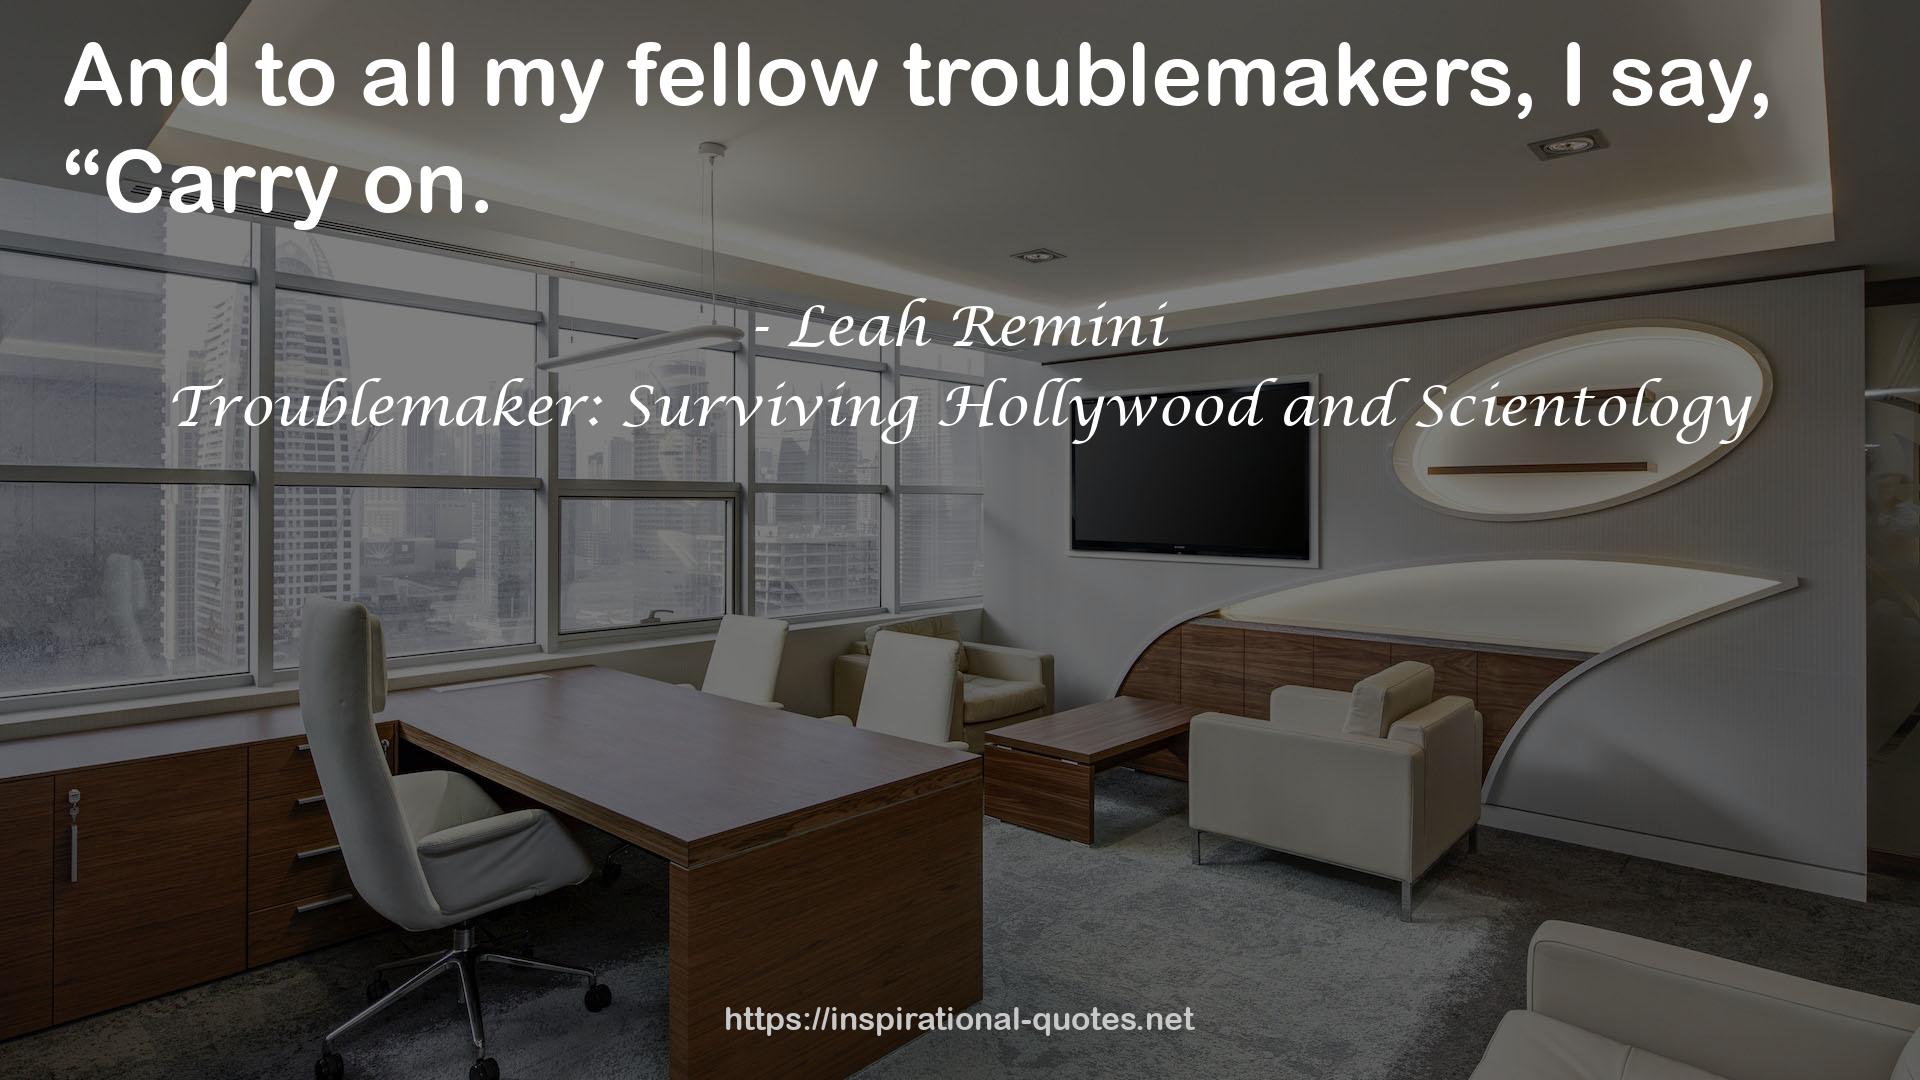 Troublemaker: Surviving Hollywood and Scientology QUOTES